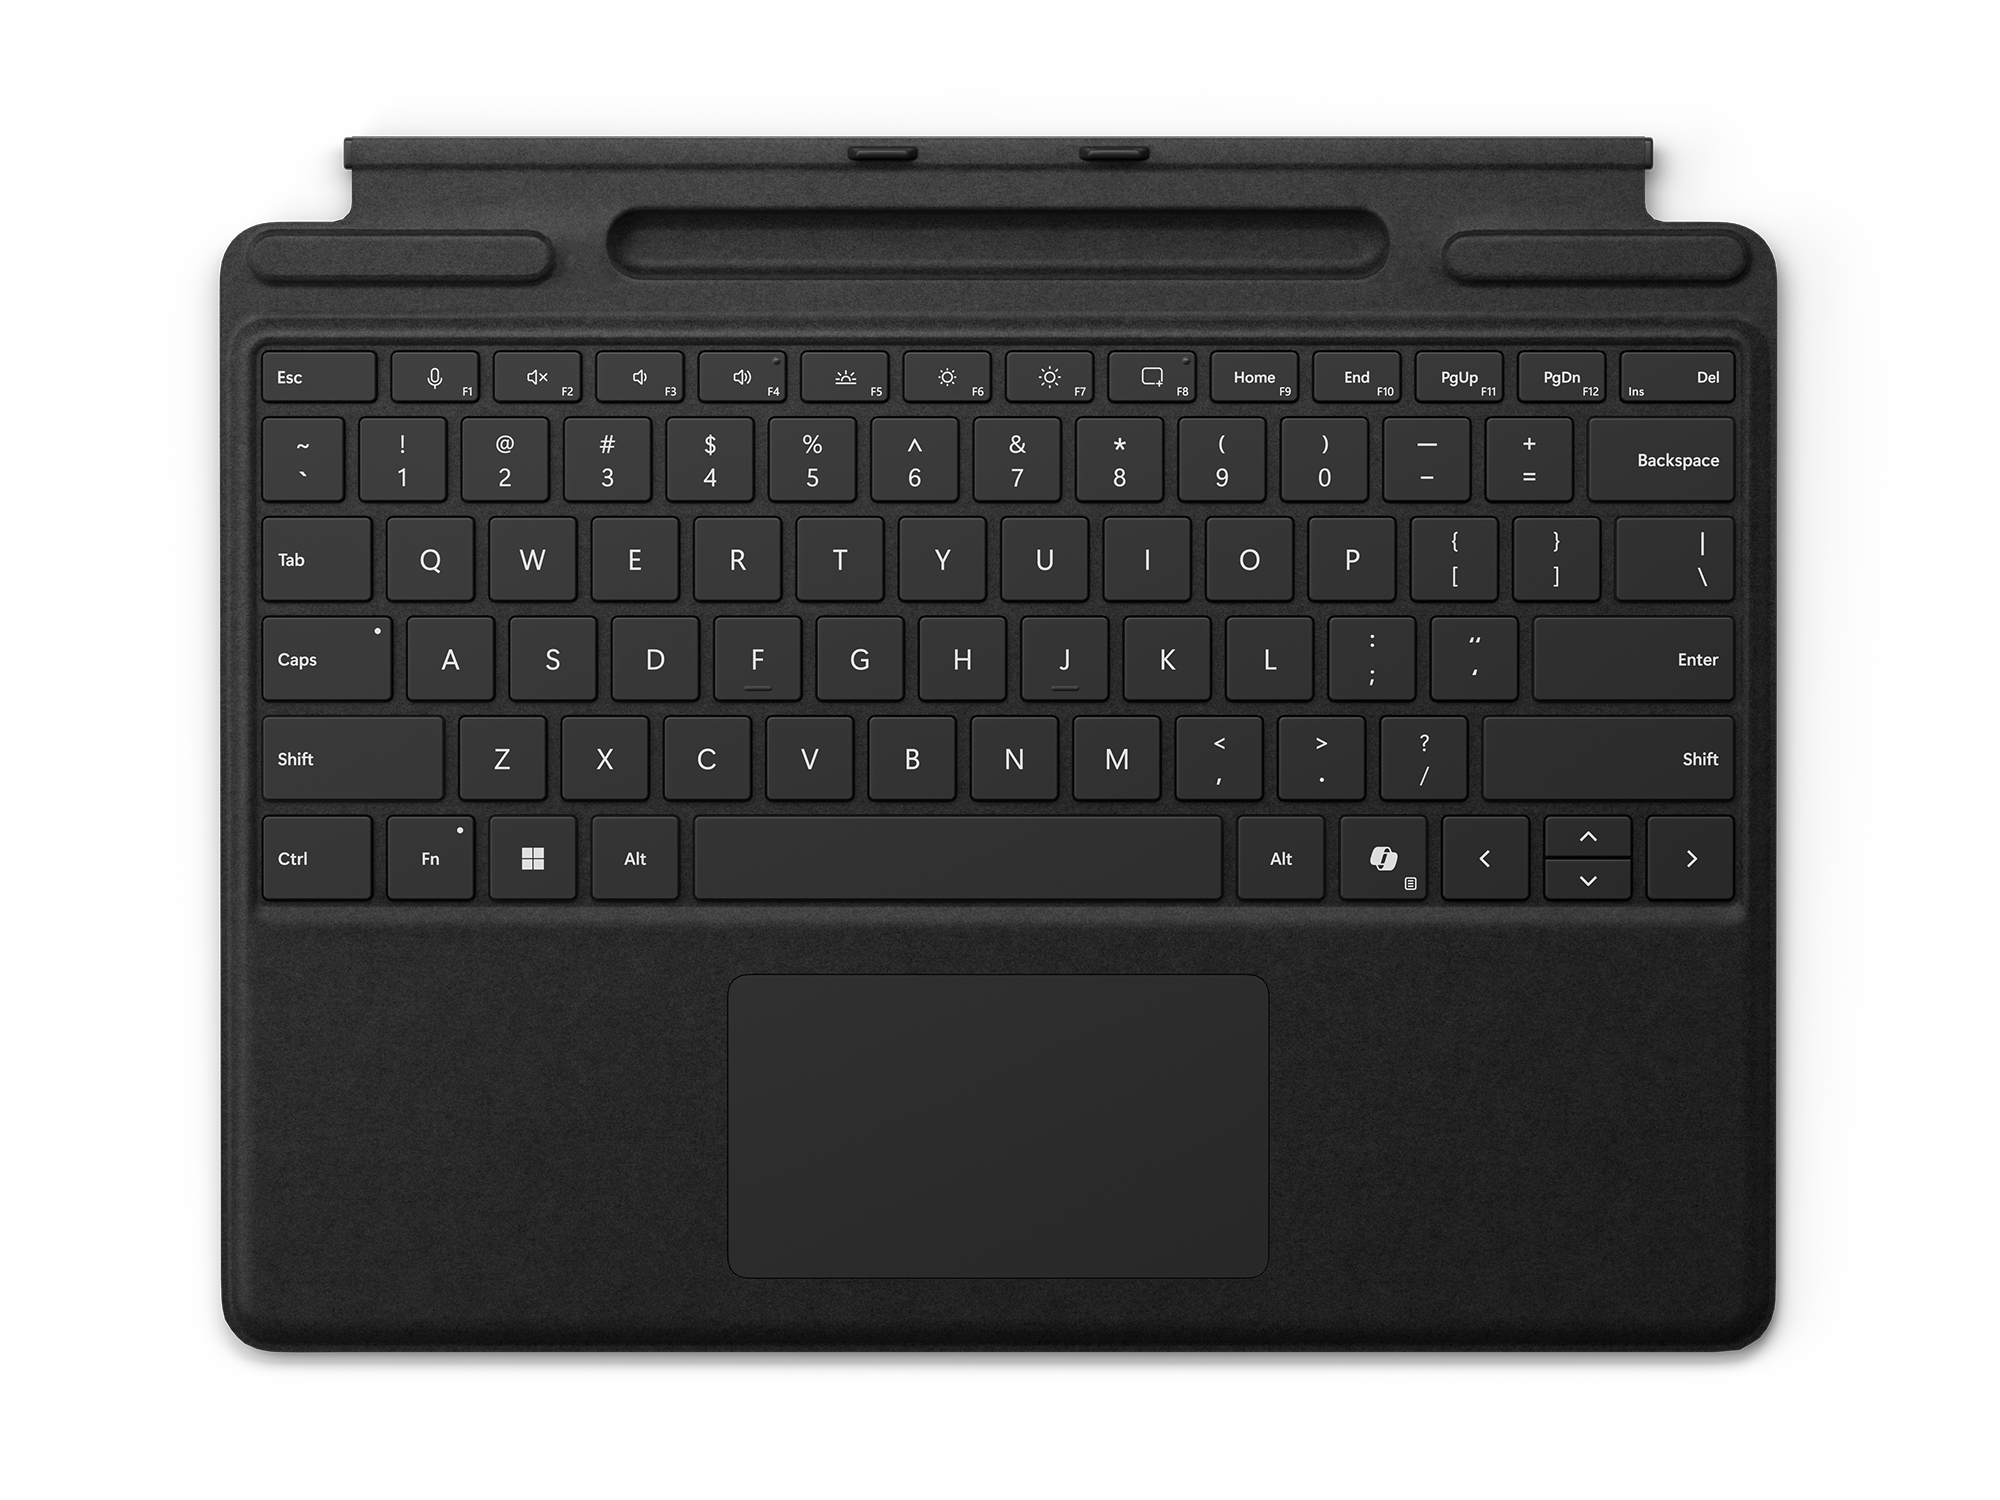 Surface Pro Keyboard with pen storage - Cover with Backlit Keys | Microsoft  Store